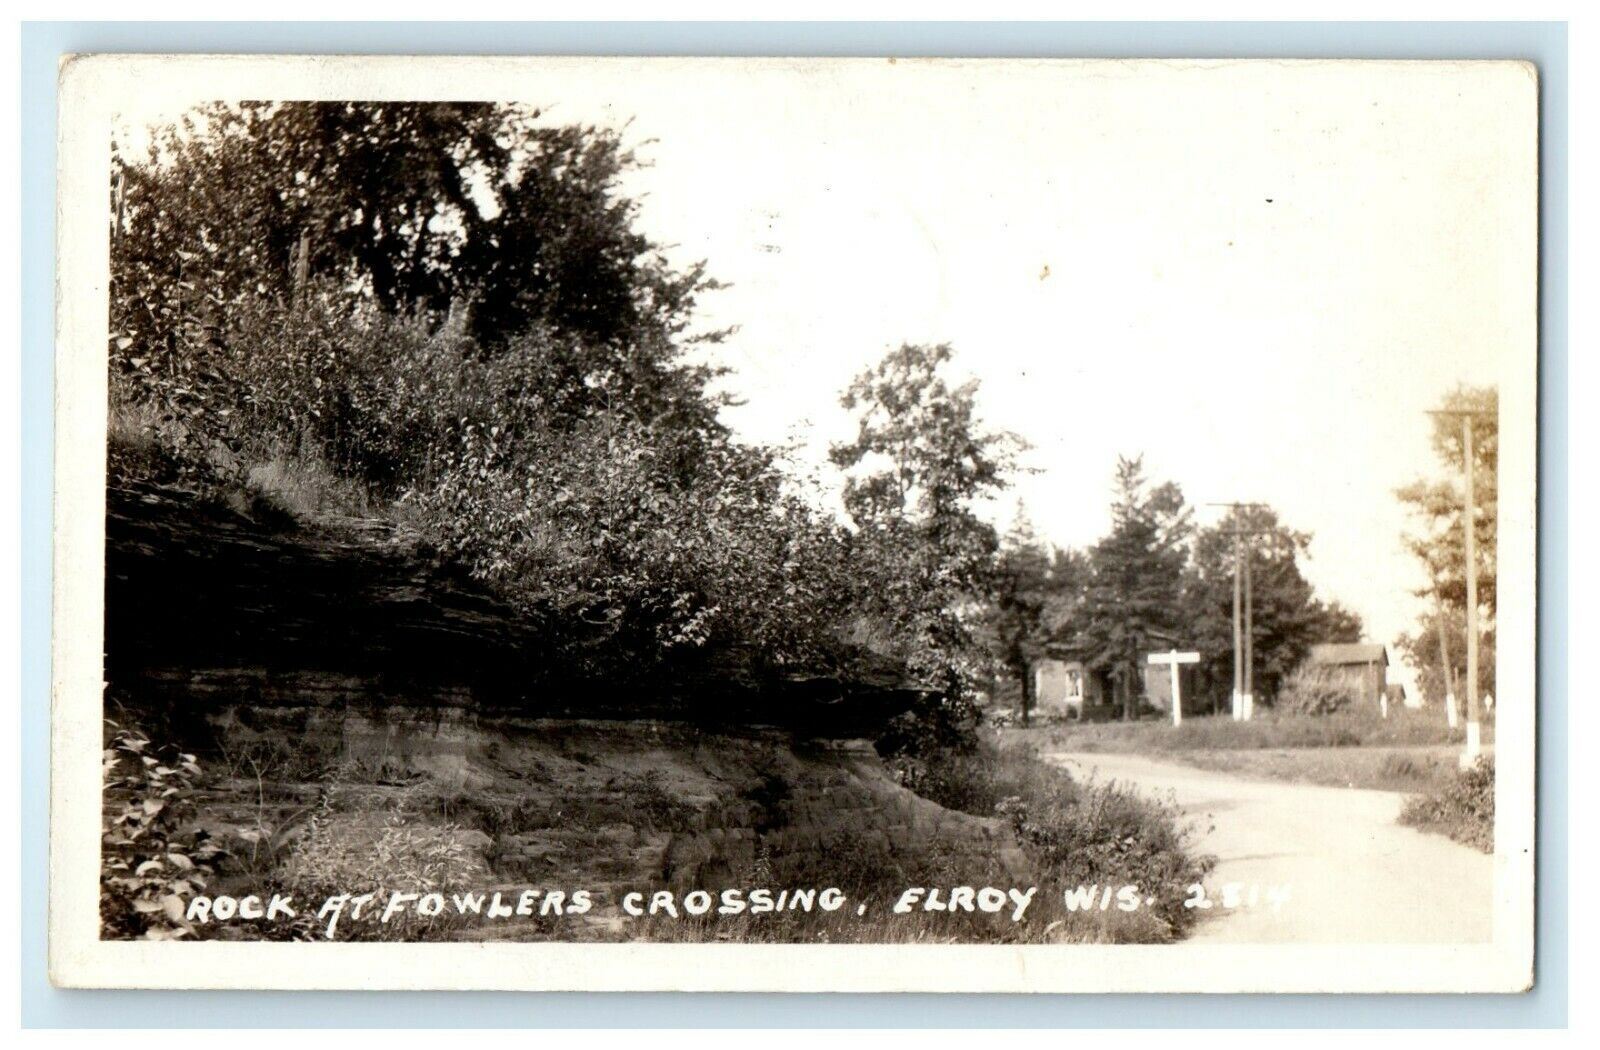 1929 Fowlers Crossing Elroy Wisconsin WI Janesville RPPC Photo Posted Postcard